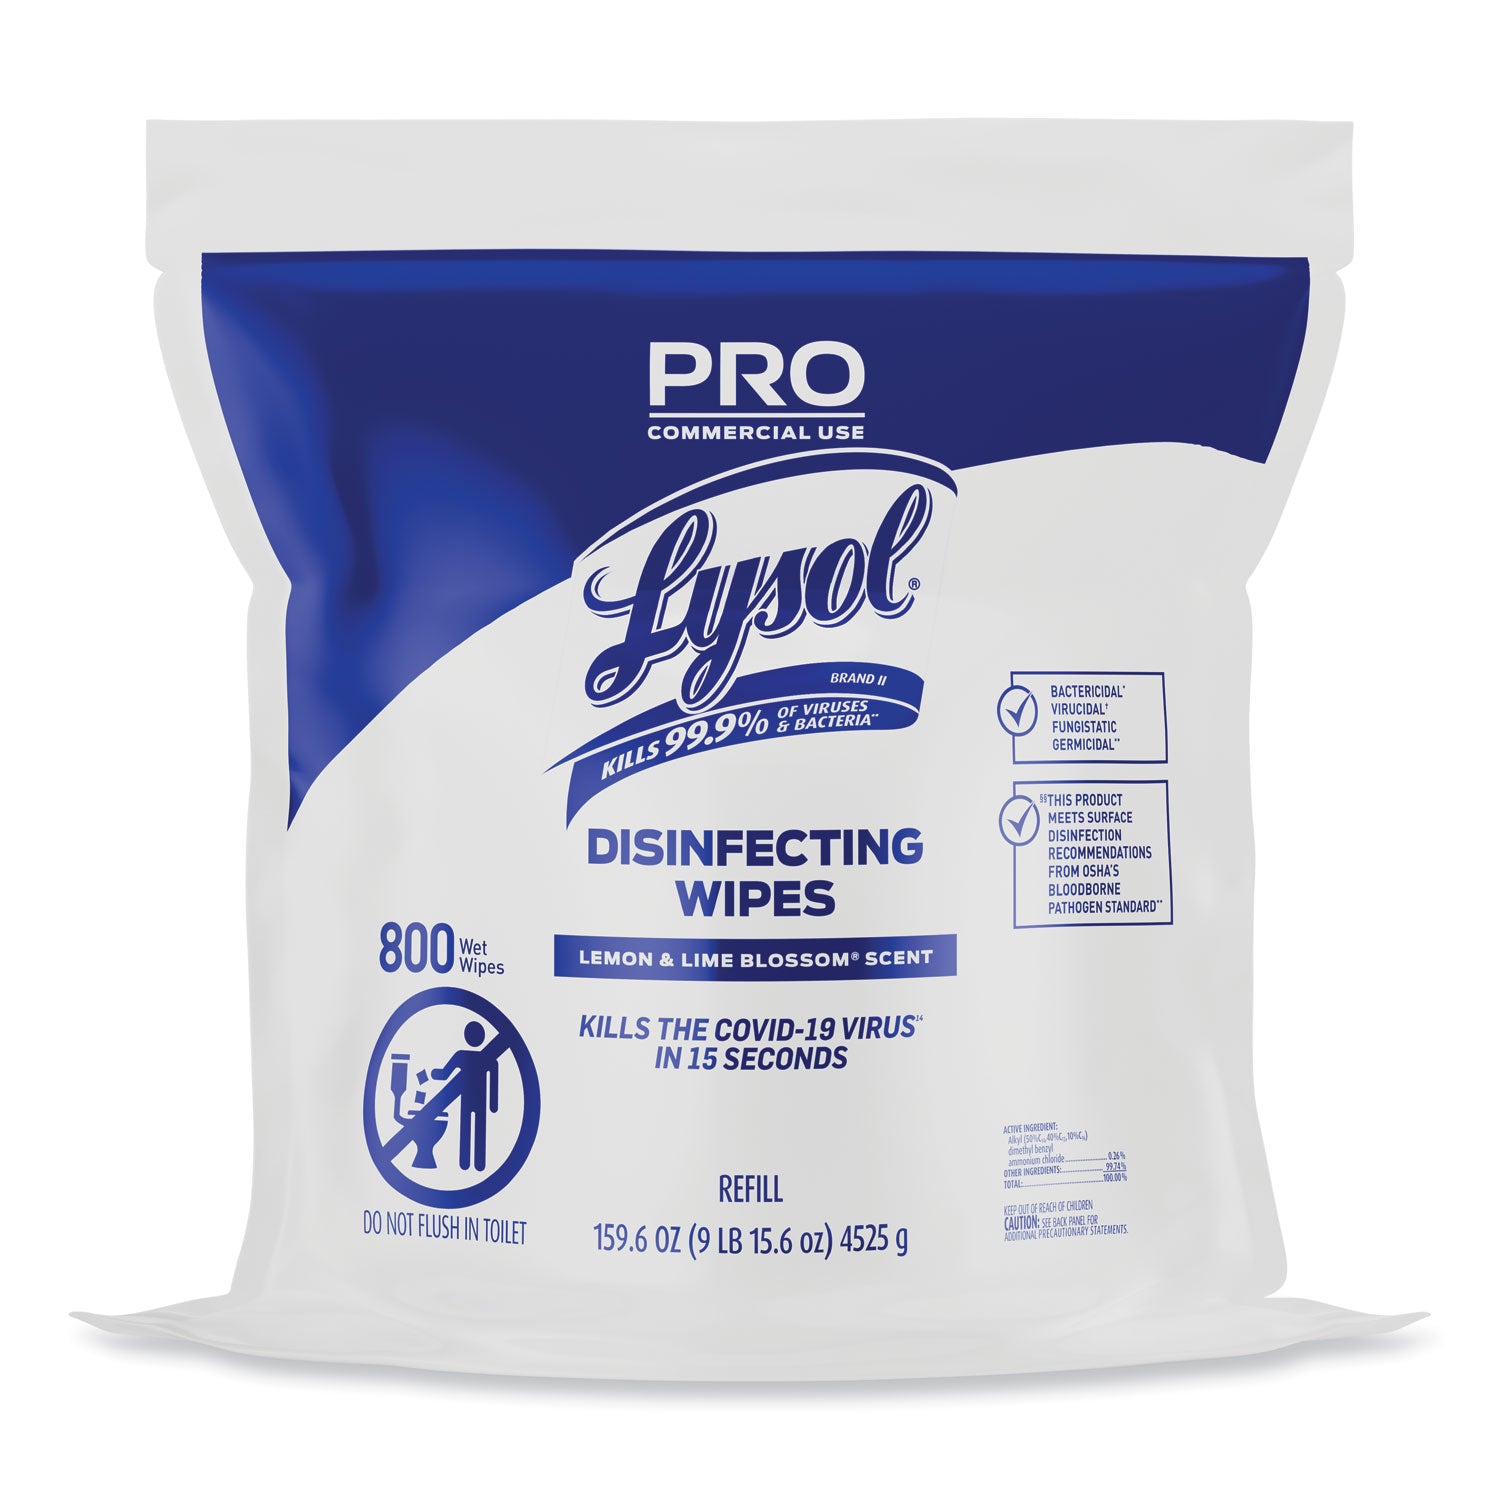 professional-disinfecting-wipe-bucket-refill-1-ply-6-x-8-lemon-and-lime-blossom-white-800-wipes-bag-2-refill-bags-ct_rac99857ct - 1